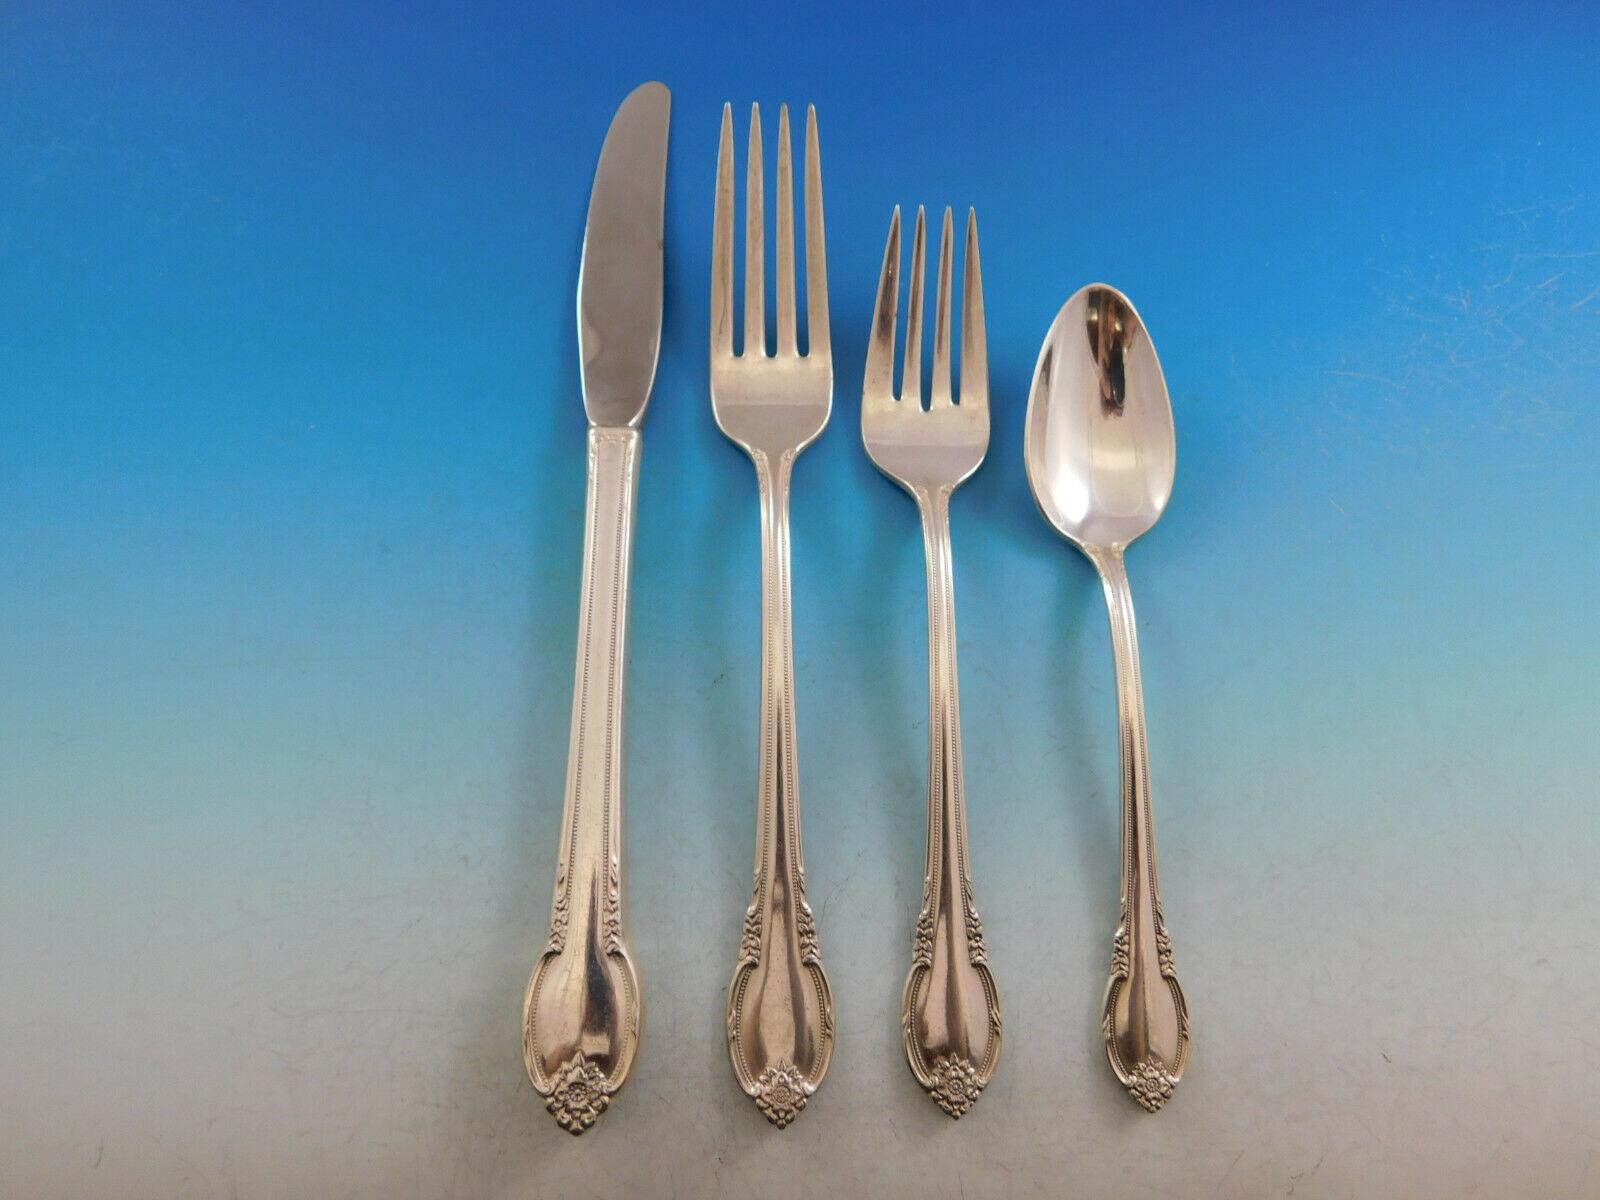 1847 rogers bros remembrance silverware set